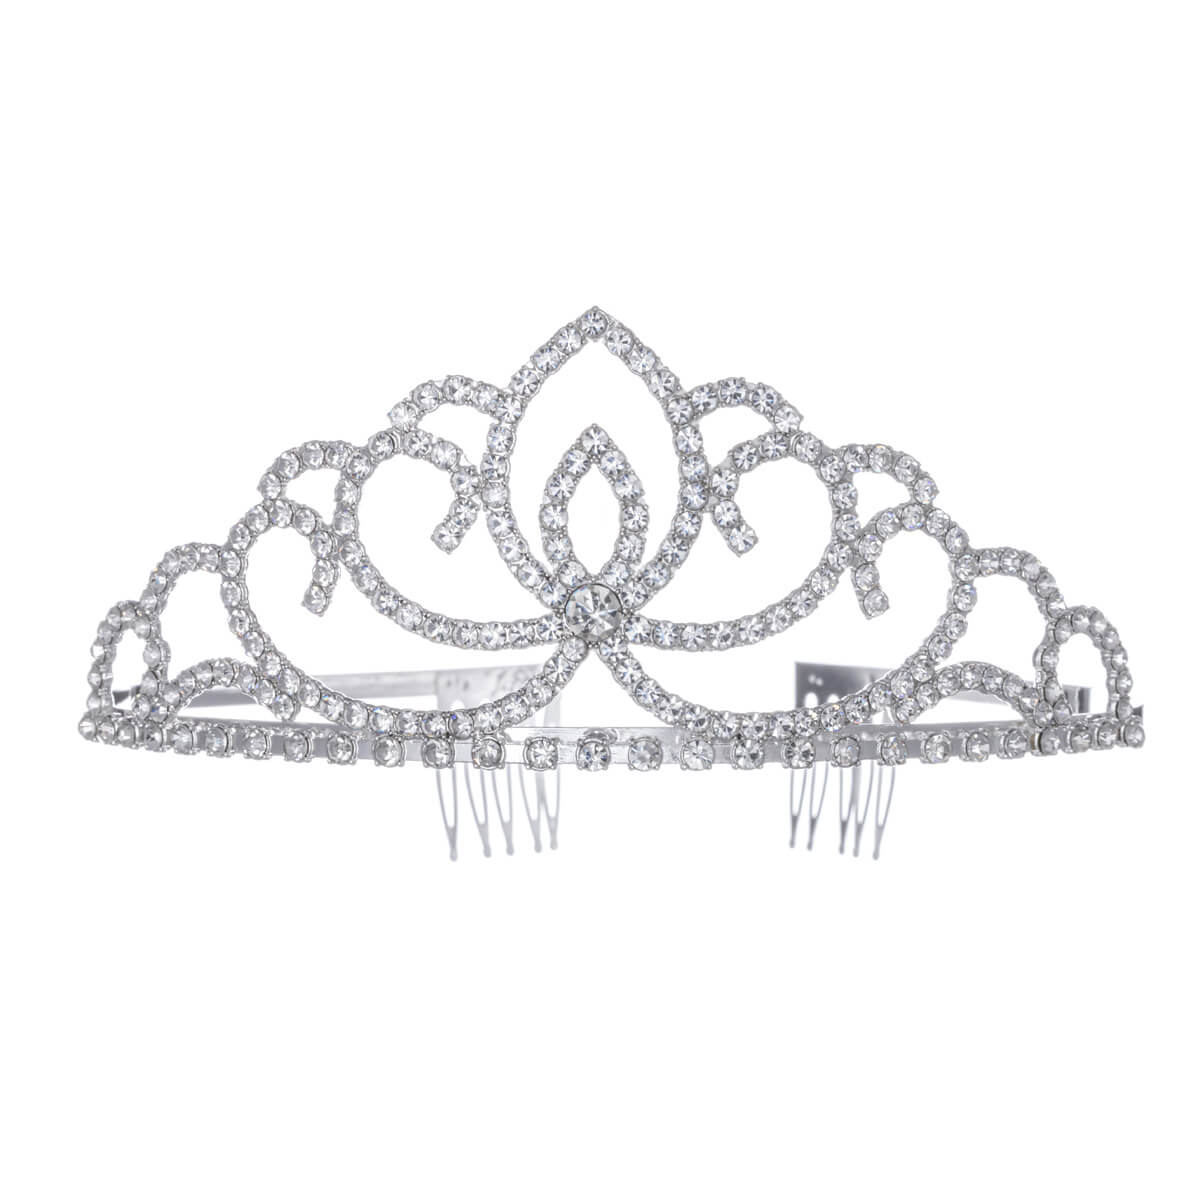 Crown tiara hairpiece with comb